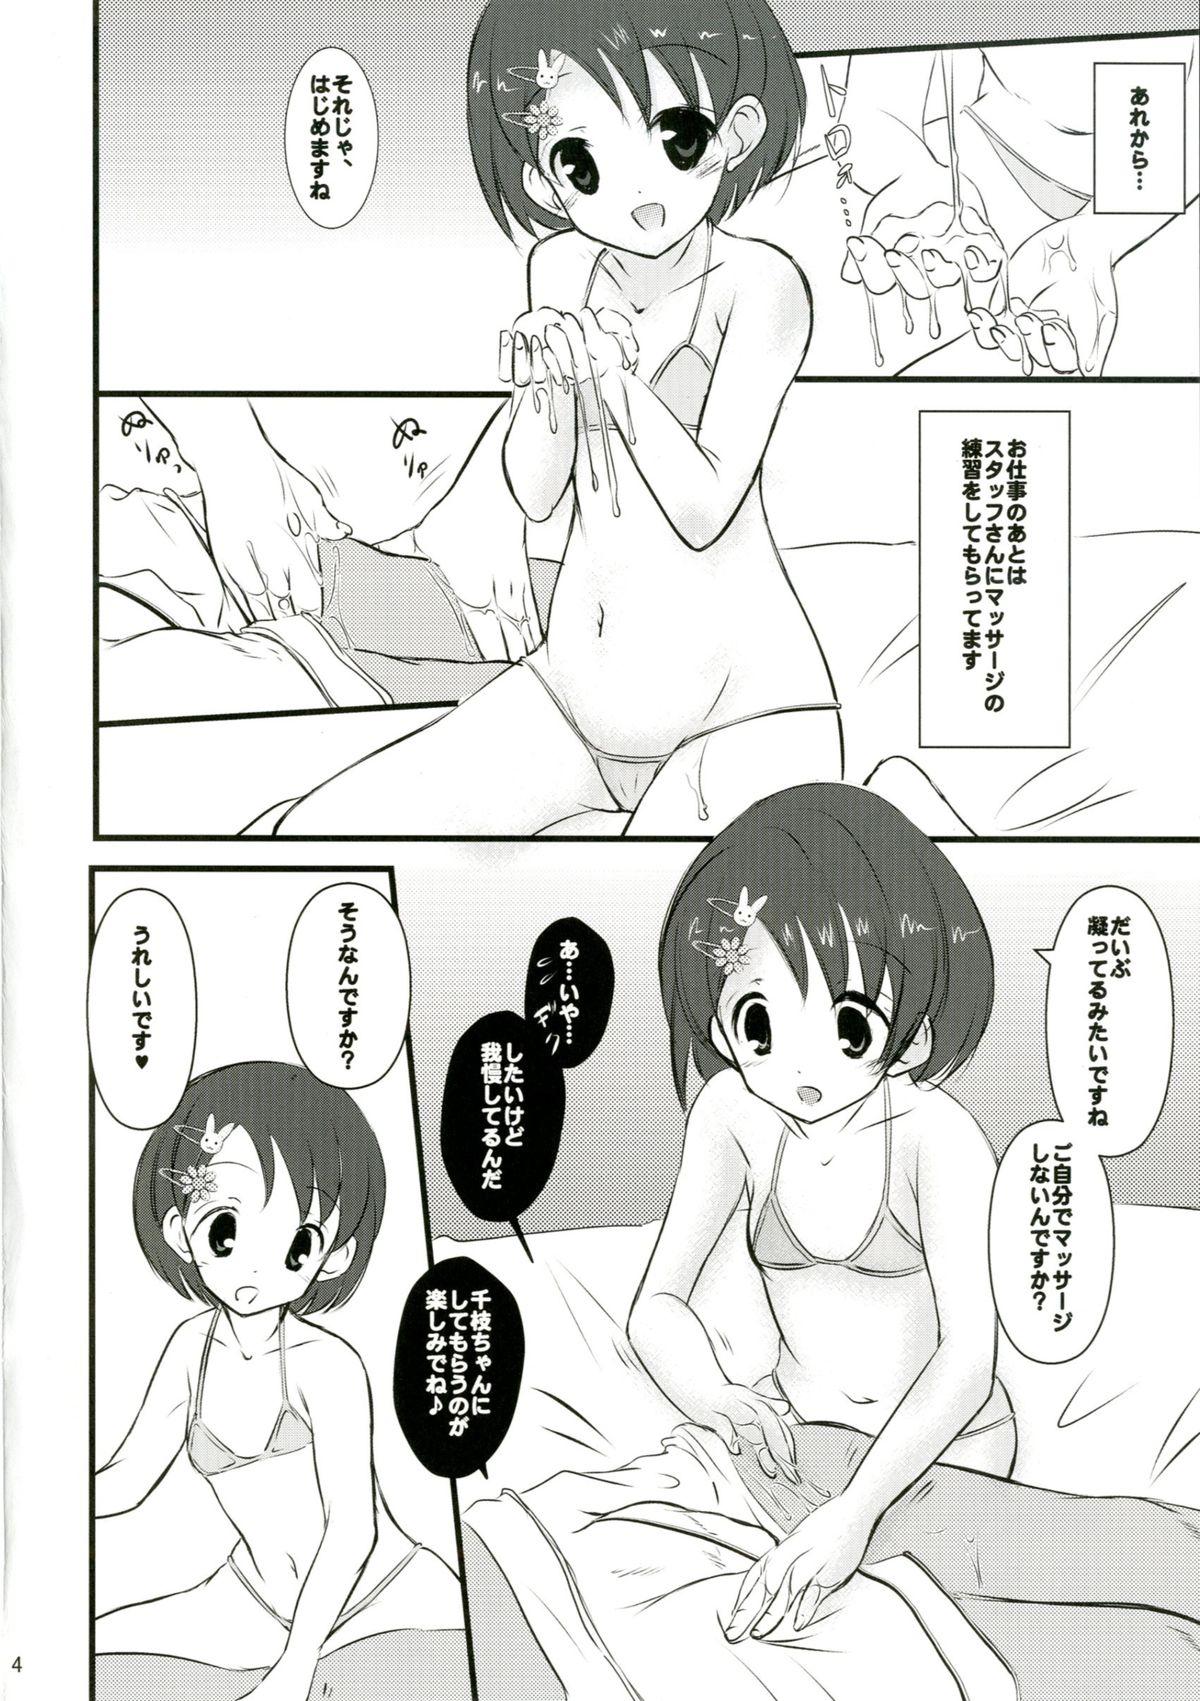 Toy FanFanBox32 - The idolmaster Erotica - Page 6